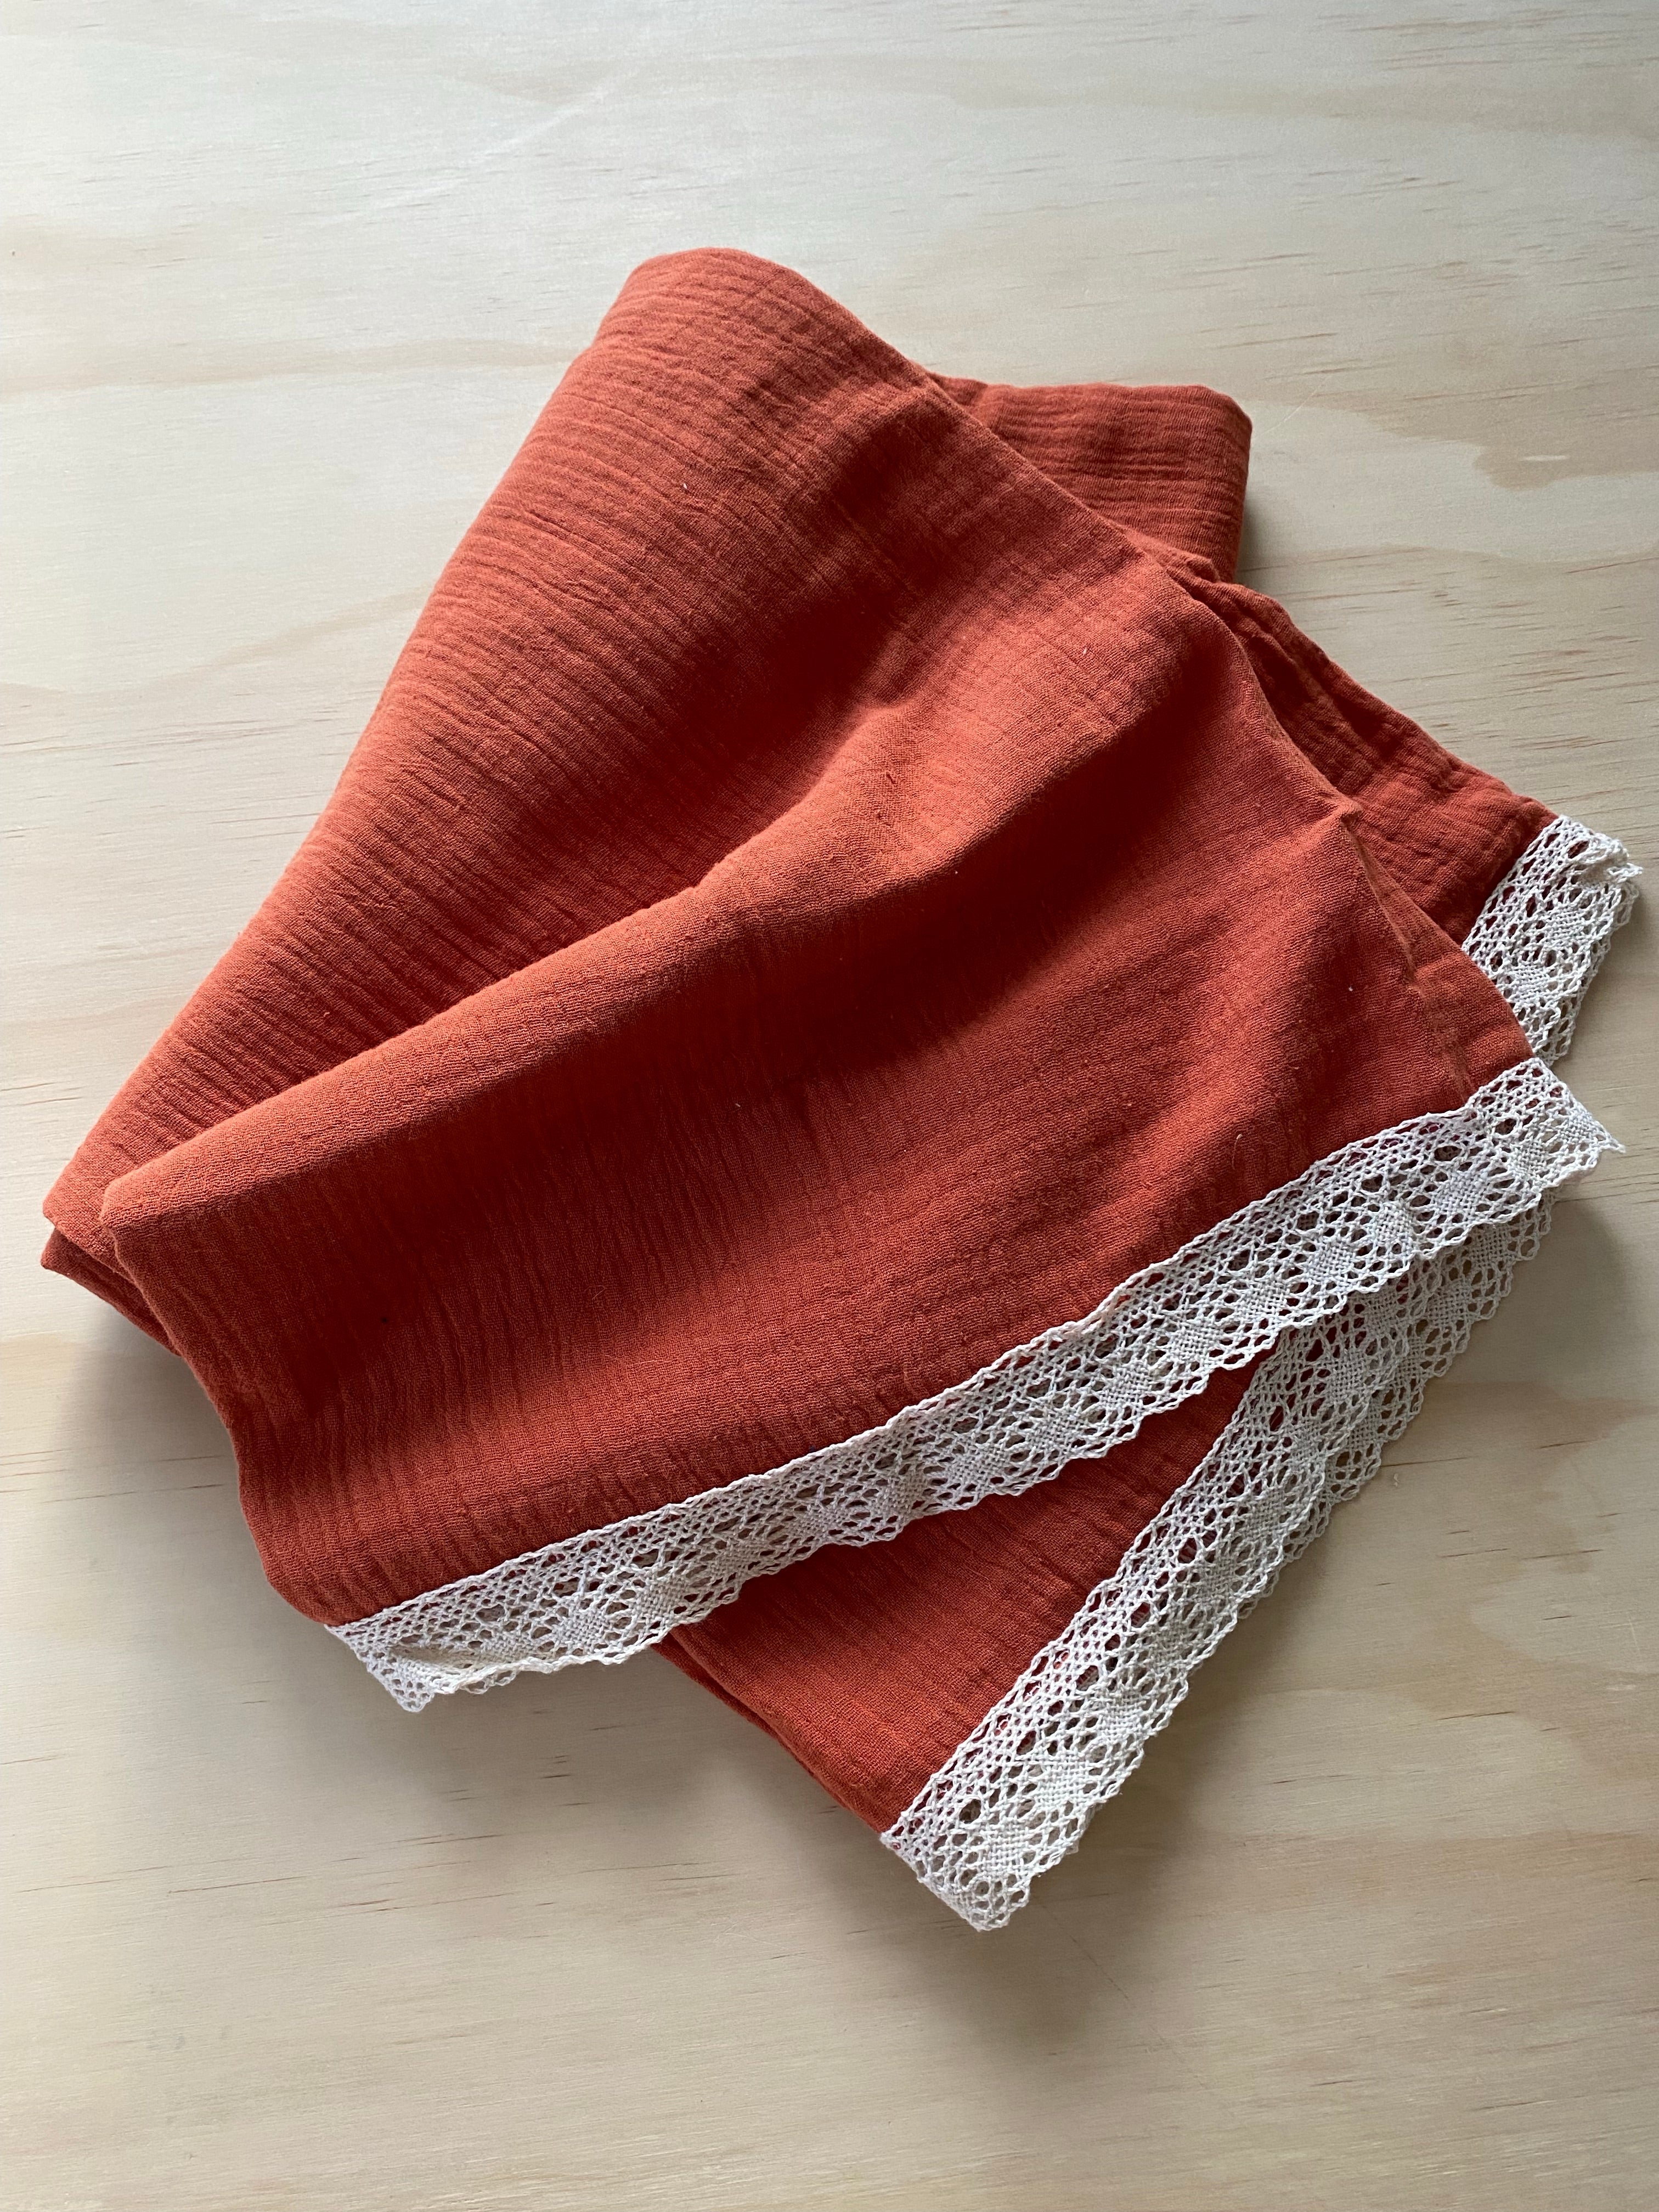 Spice Heirloom Lace Blanket